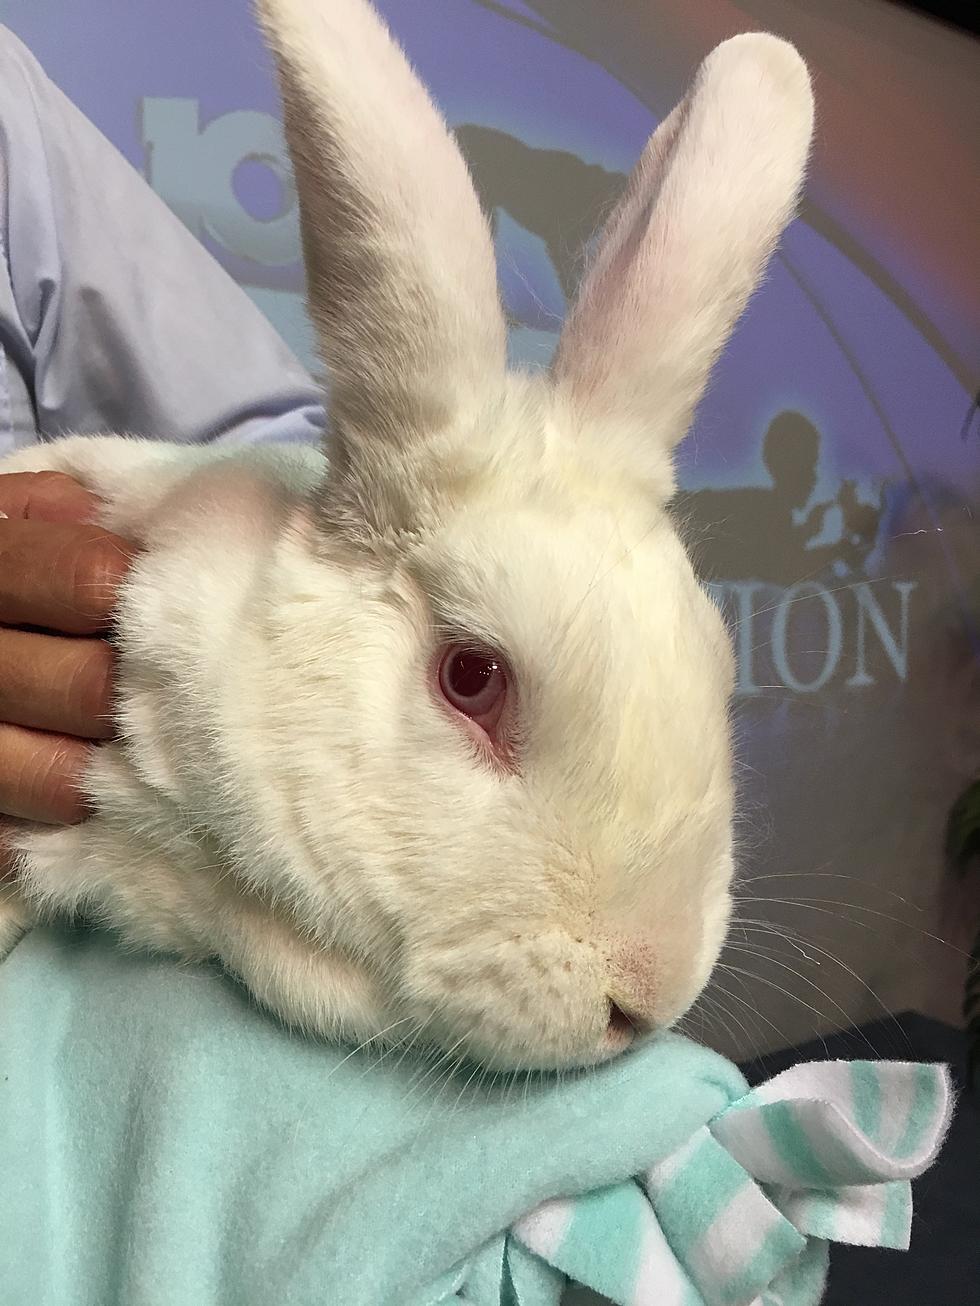 Adopt this Bunny with the Best Name Ever! [VIDEO]